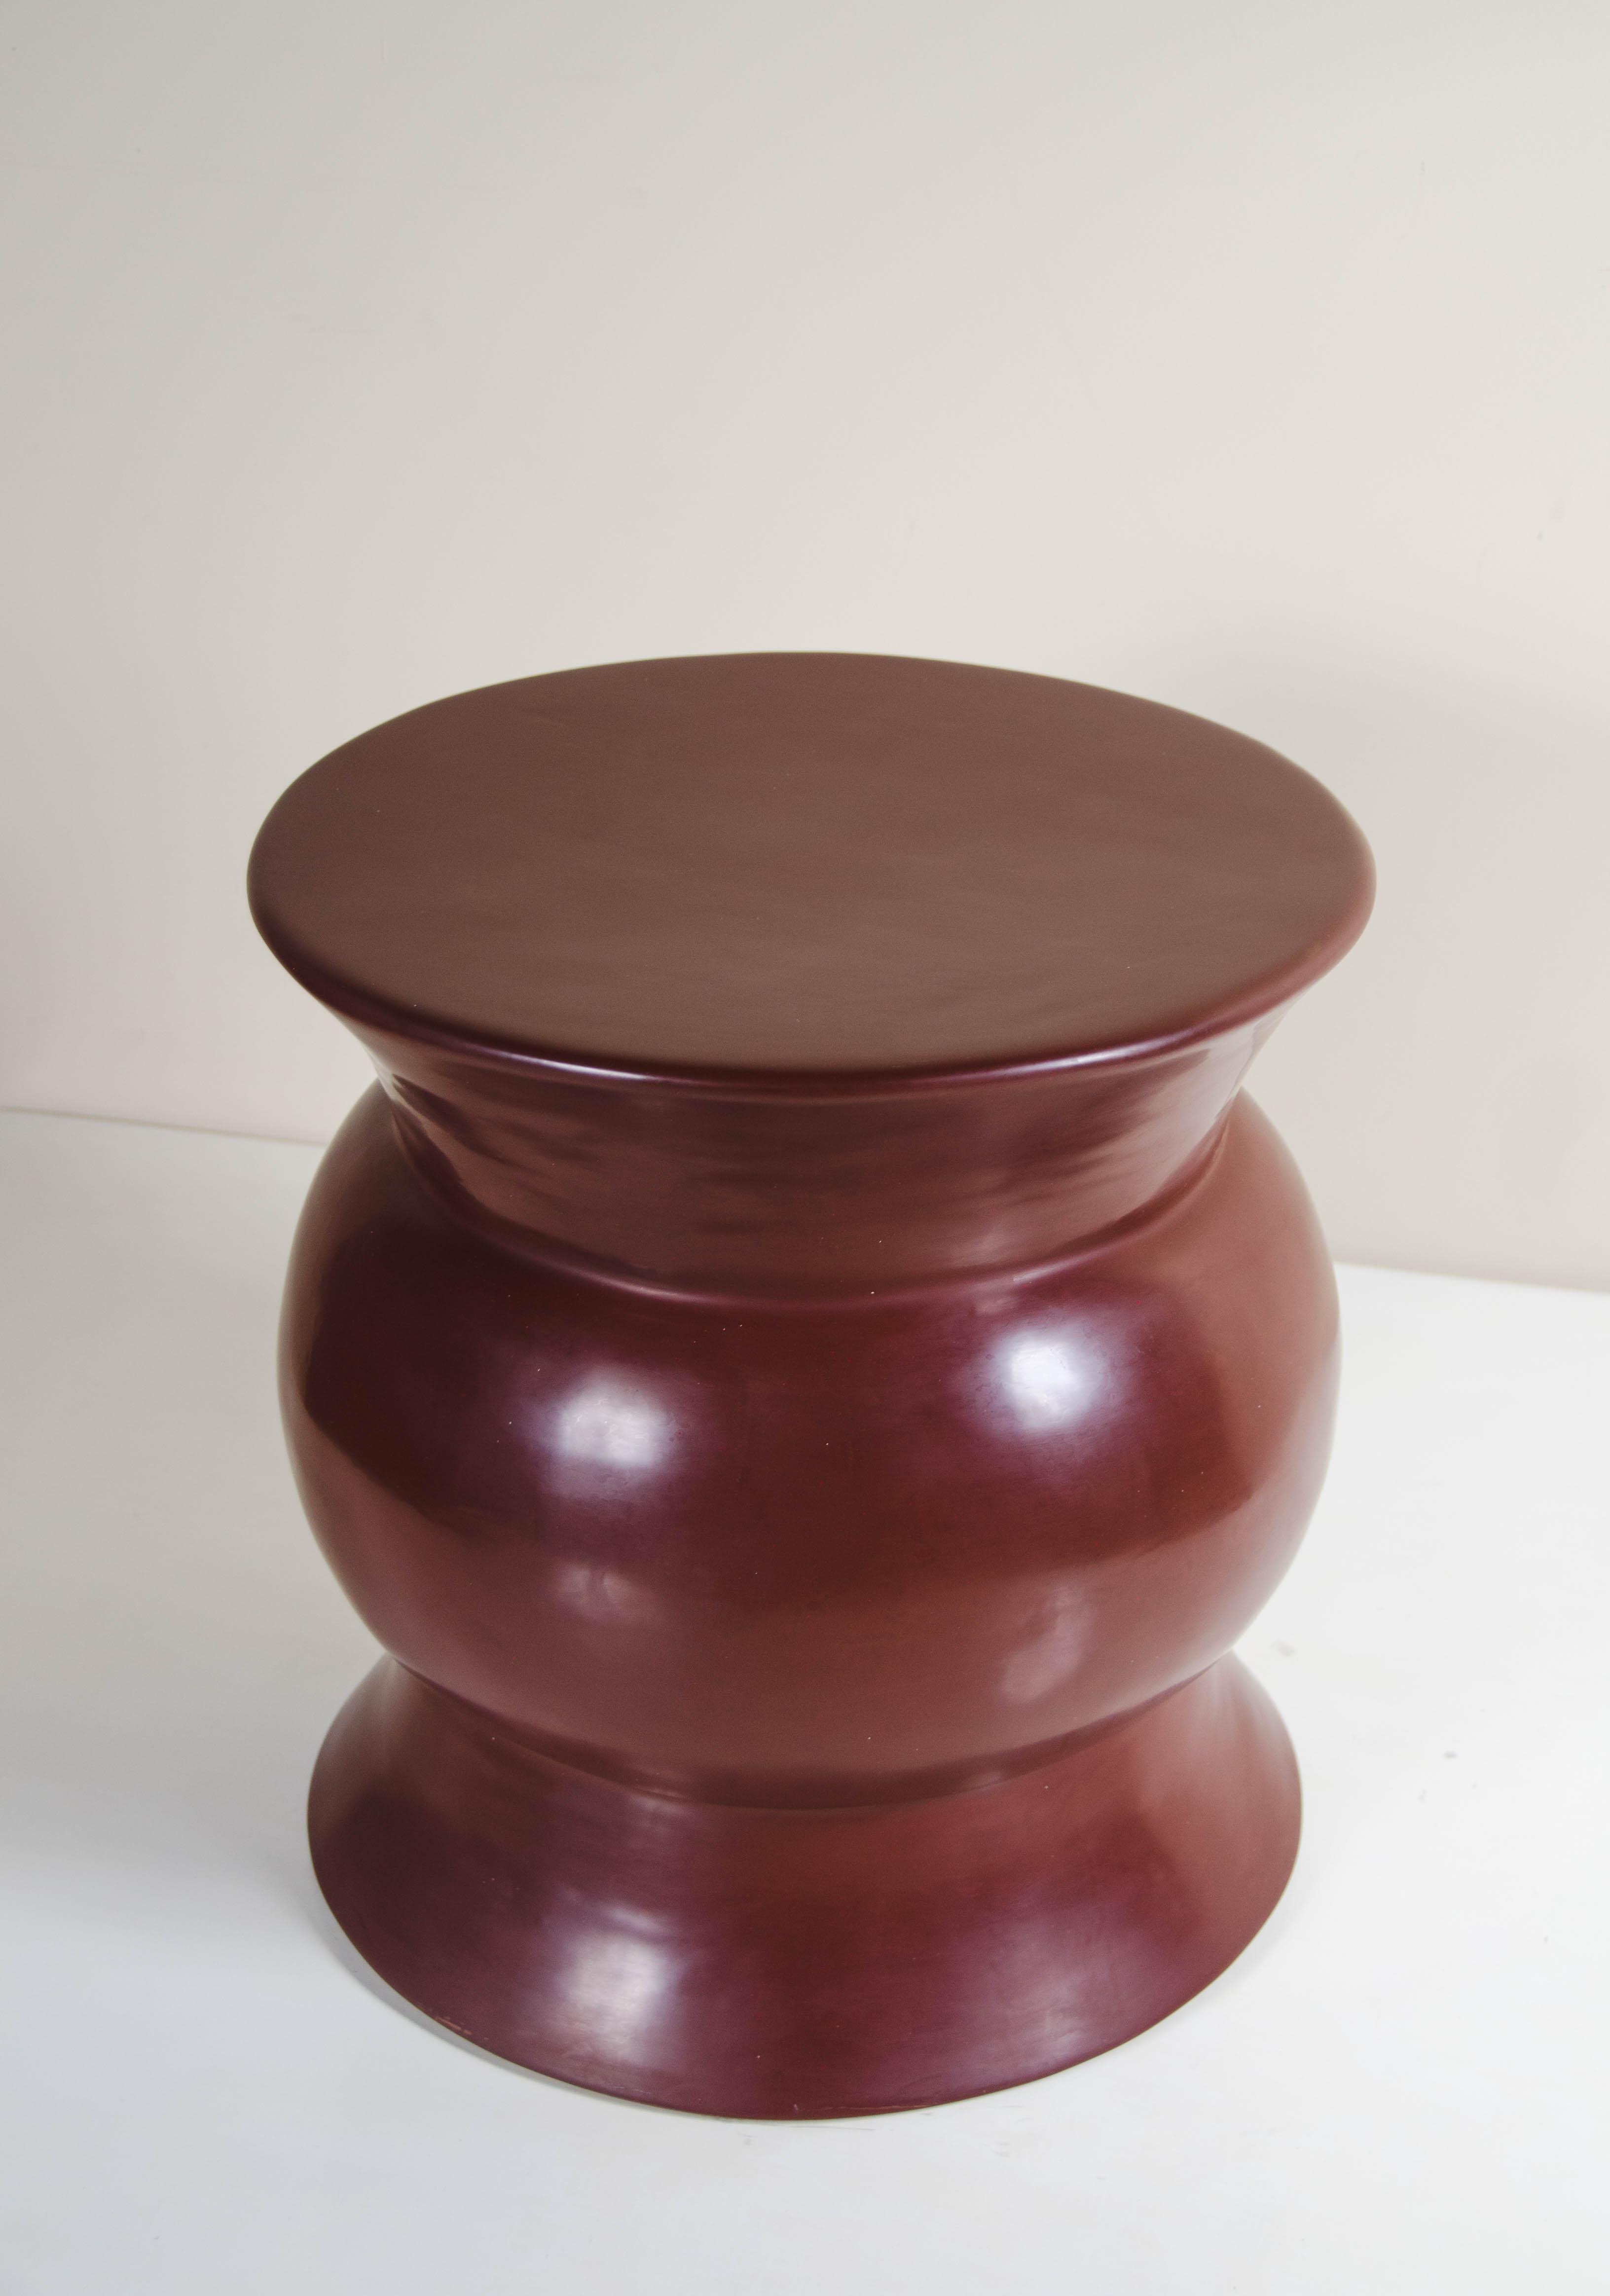 Repoussé Zun Drumstool, Red Bean Lacquer by Robert Kuo, Handmade, Limited Edition For Sale